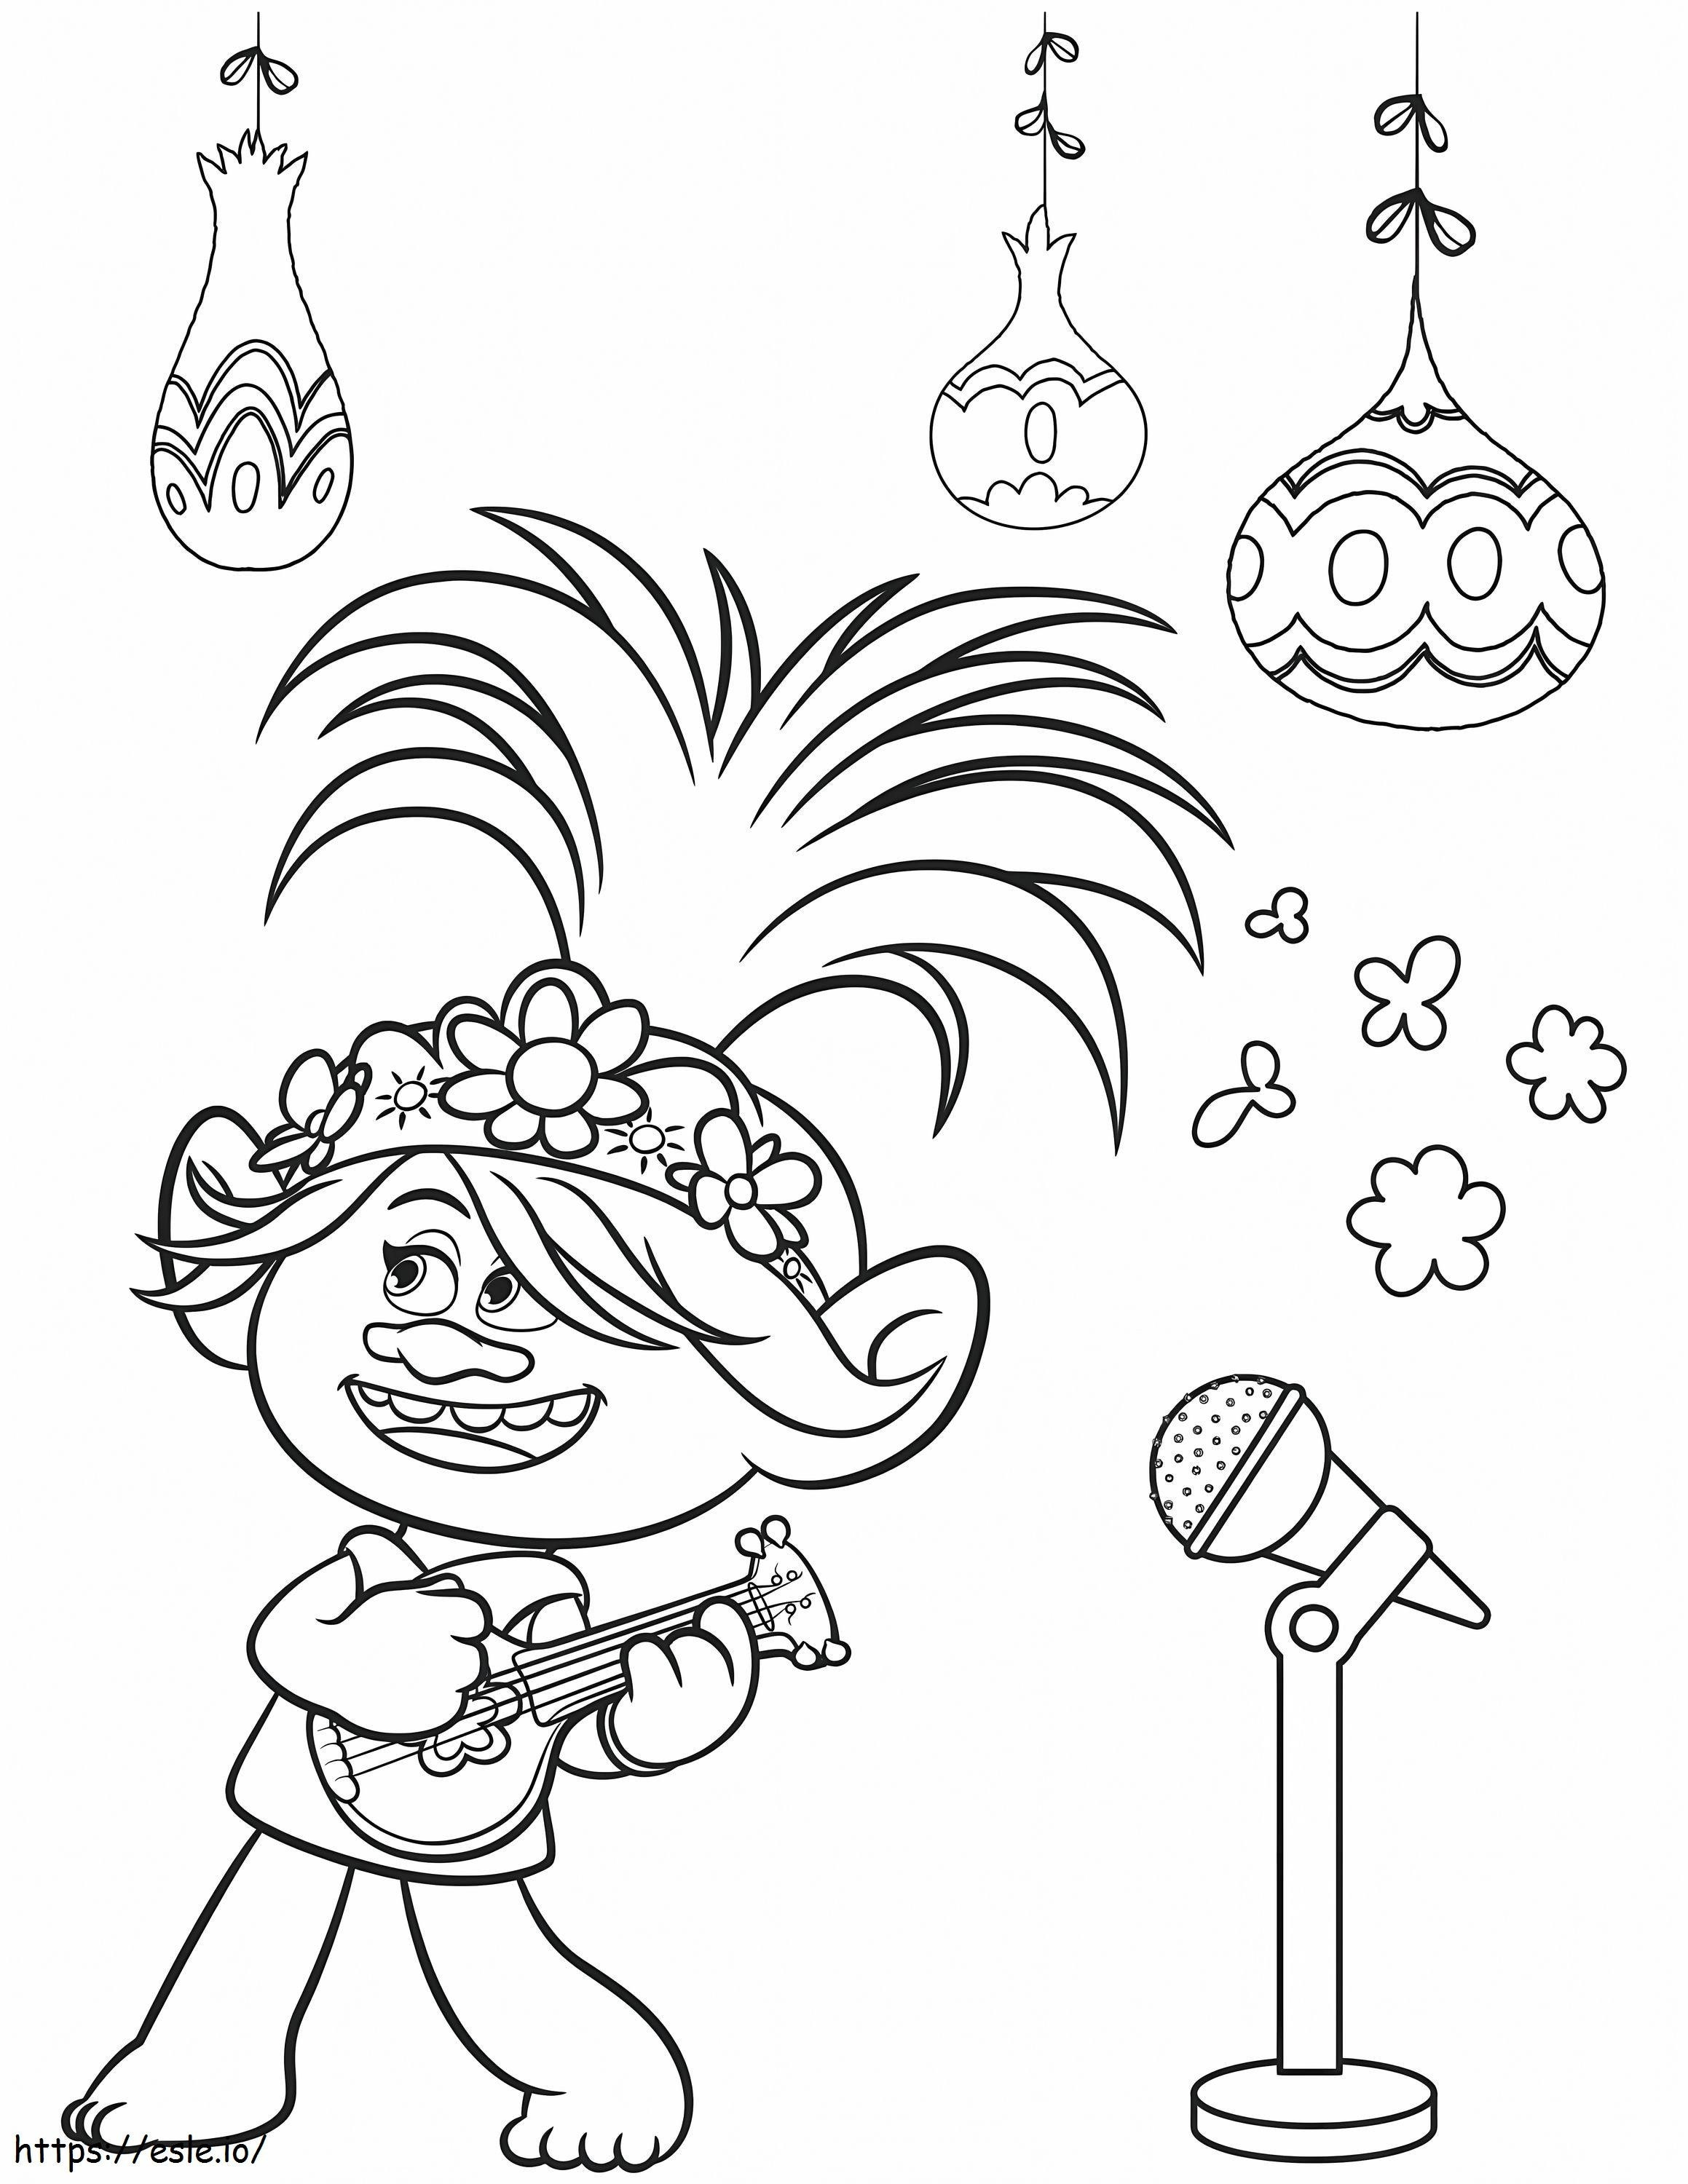 Funny Poppy Holding Guitar coloring page